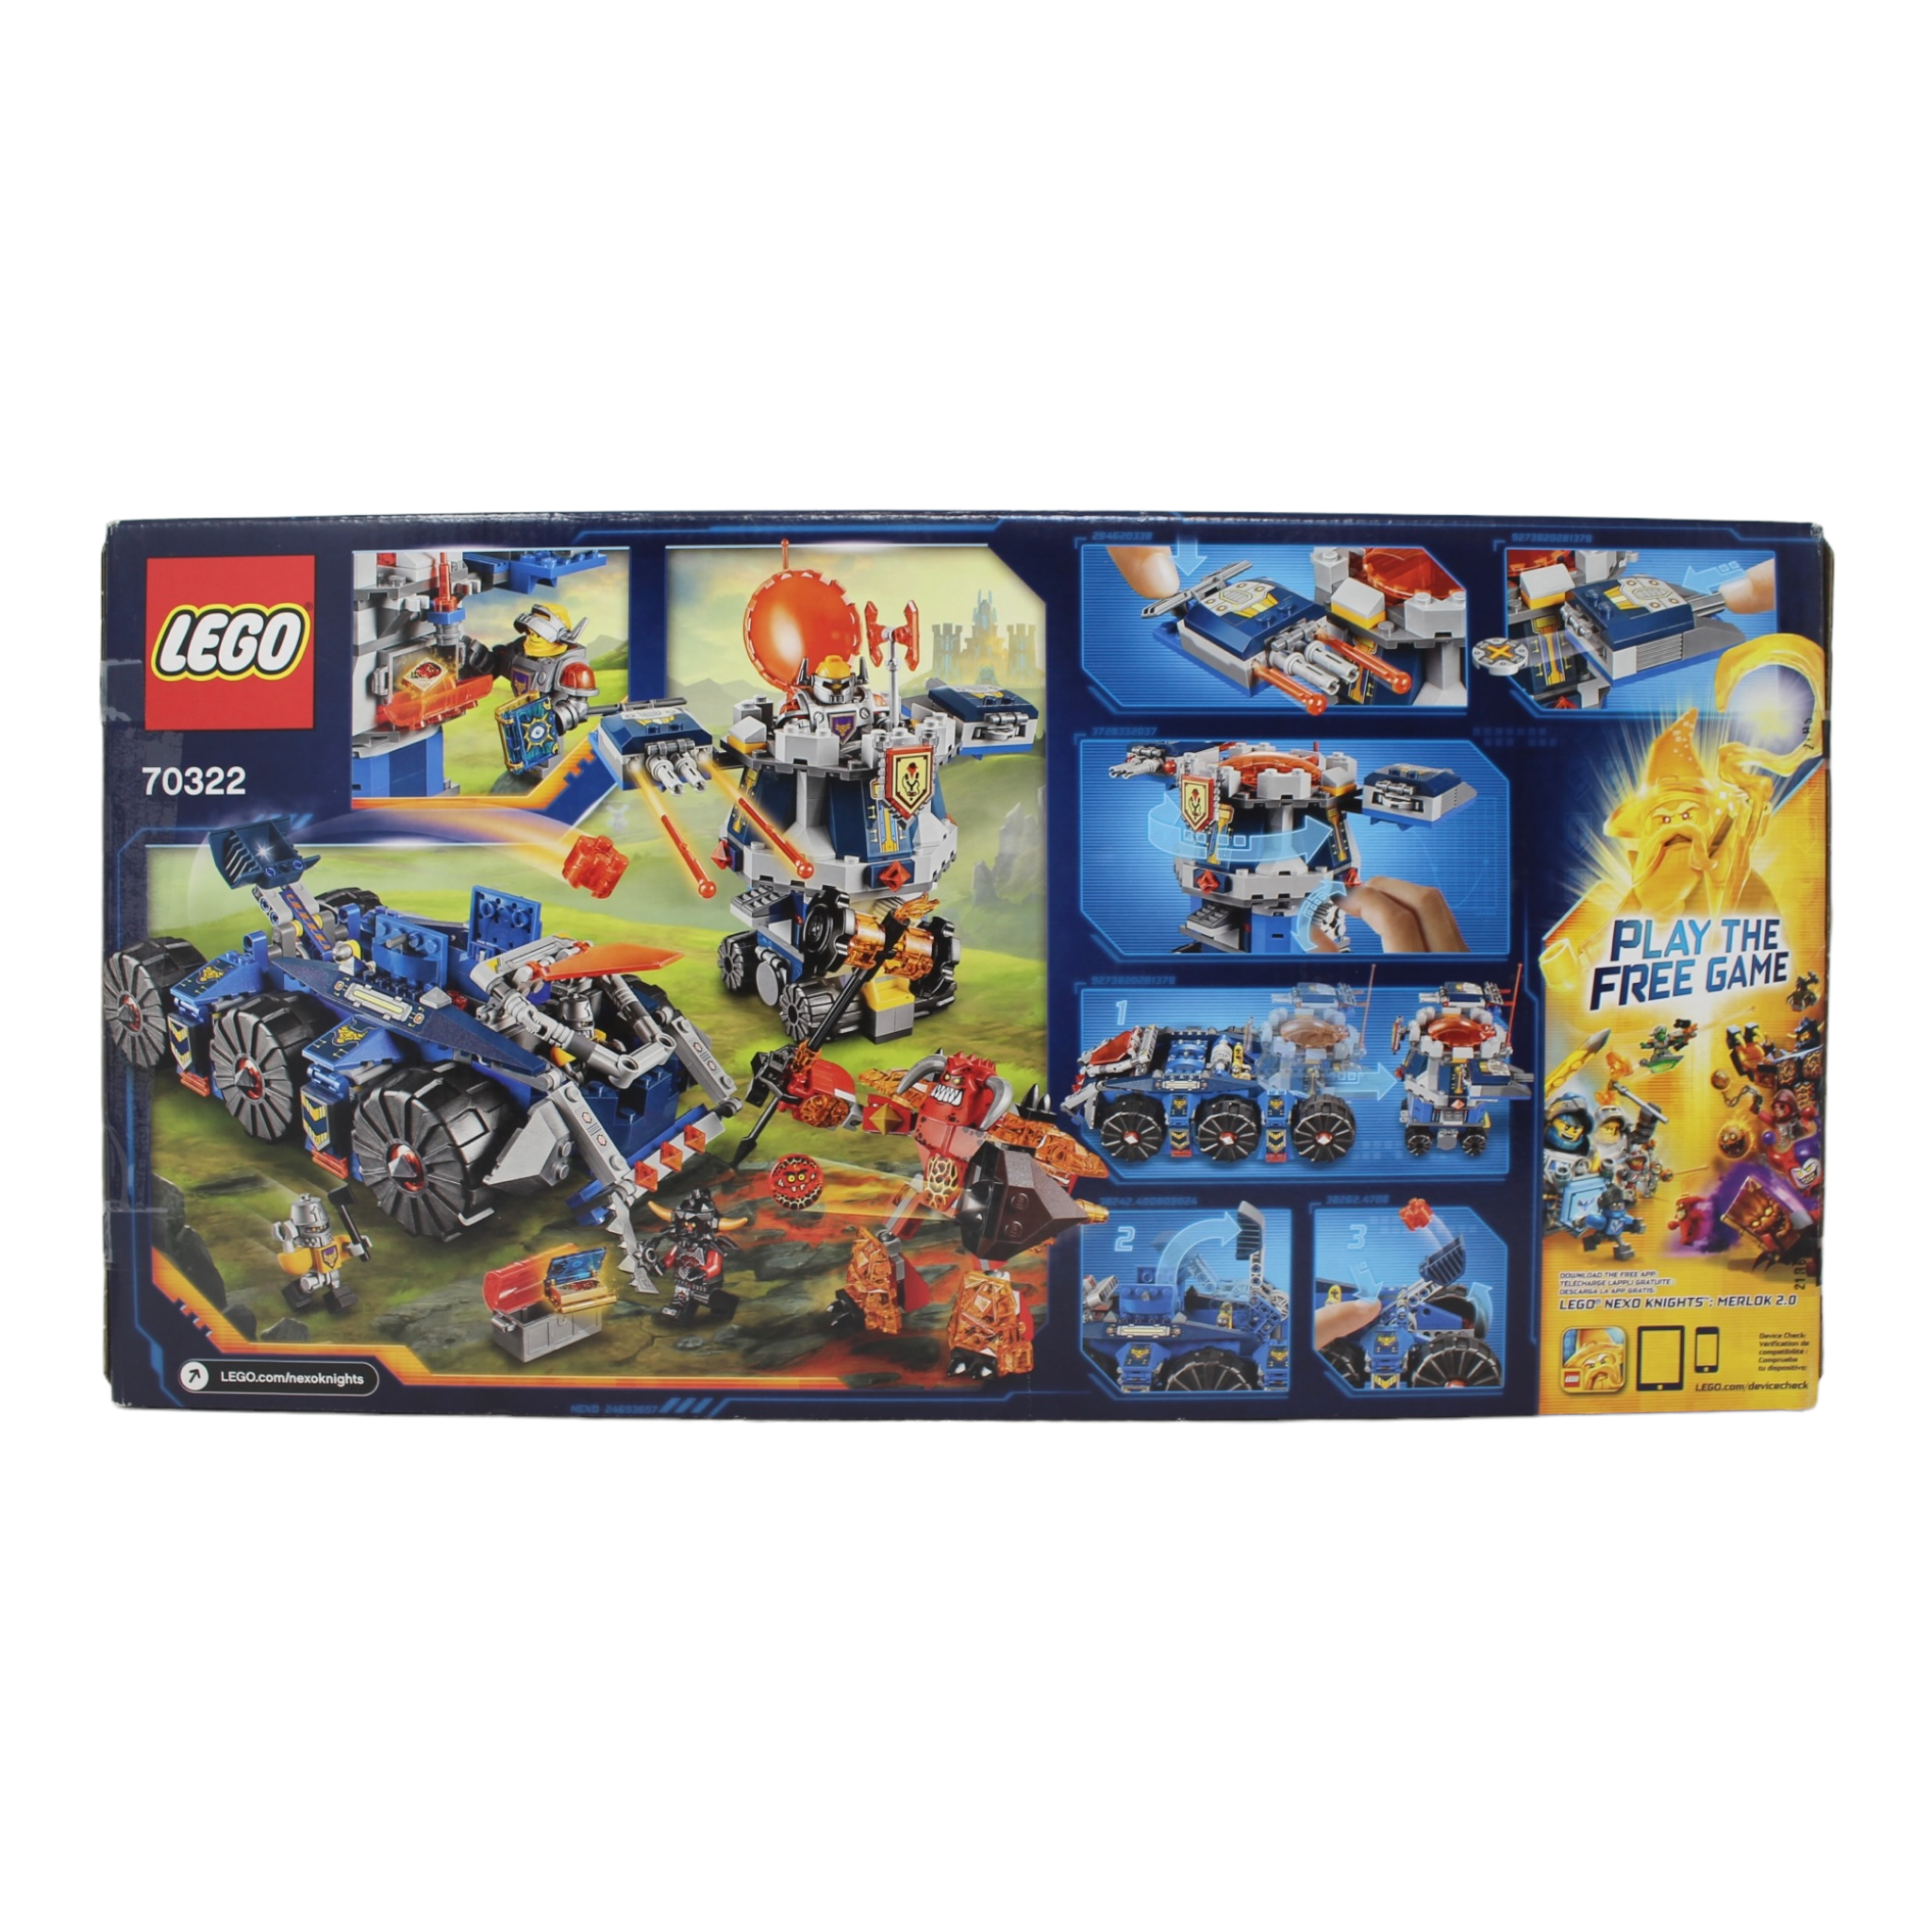 Certified Used Set 70322 Nexo Knights Axl’s Tower Carrier